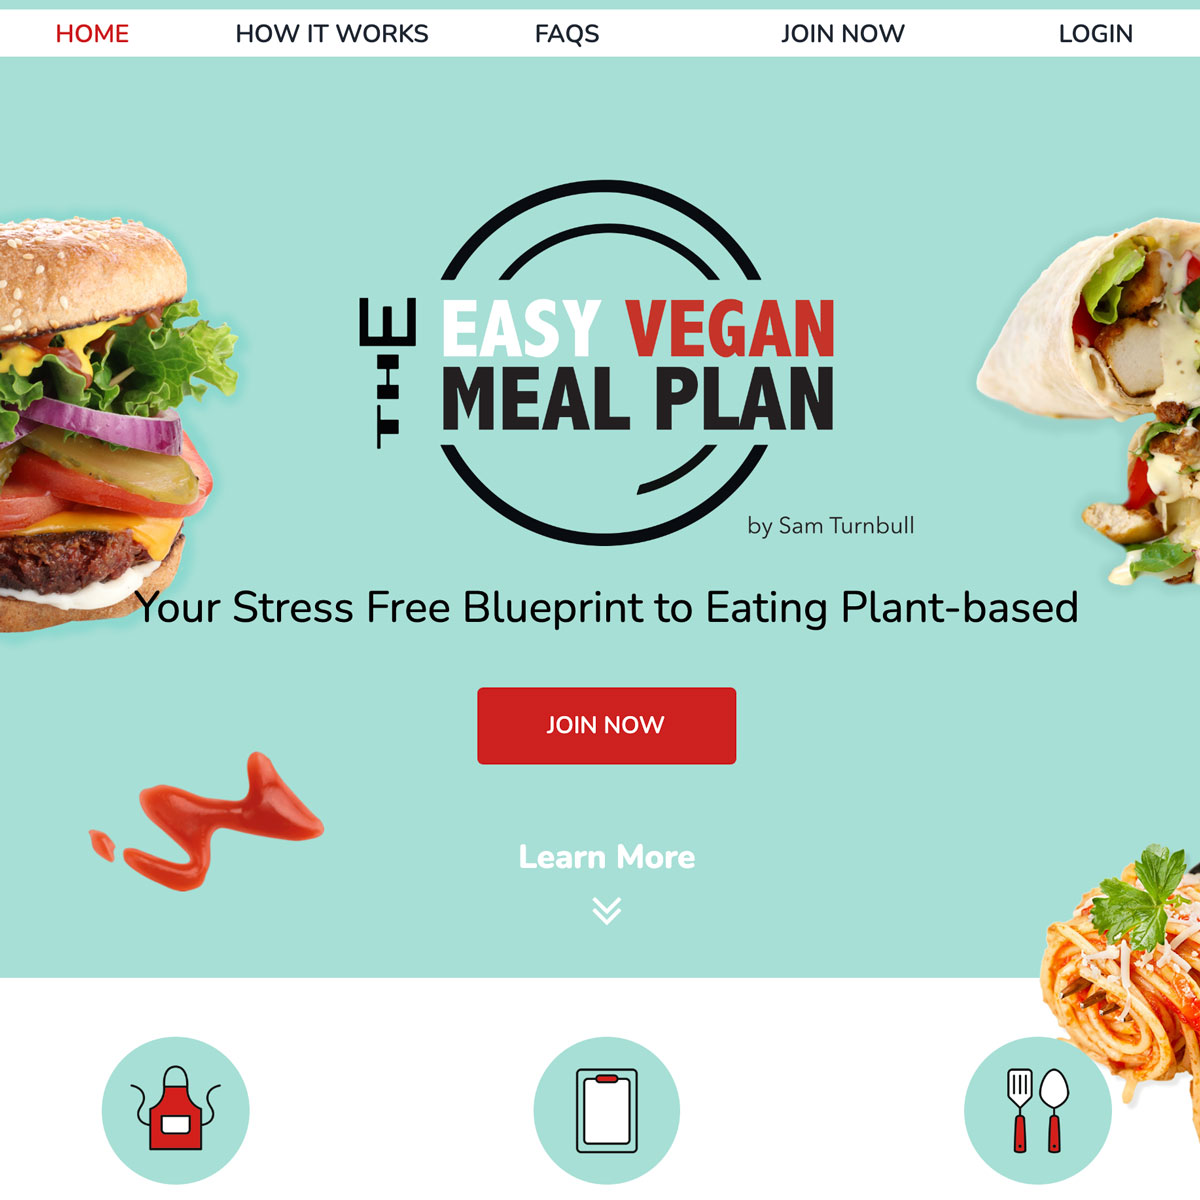 The easy vegan meal plan wil hands down the Best Vegan Gift Idea! Perfect for anyone who is looking to eat more plant-based.